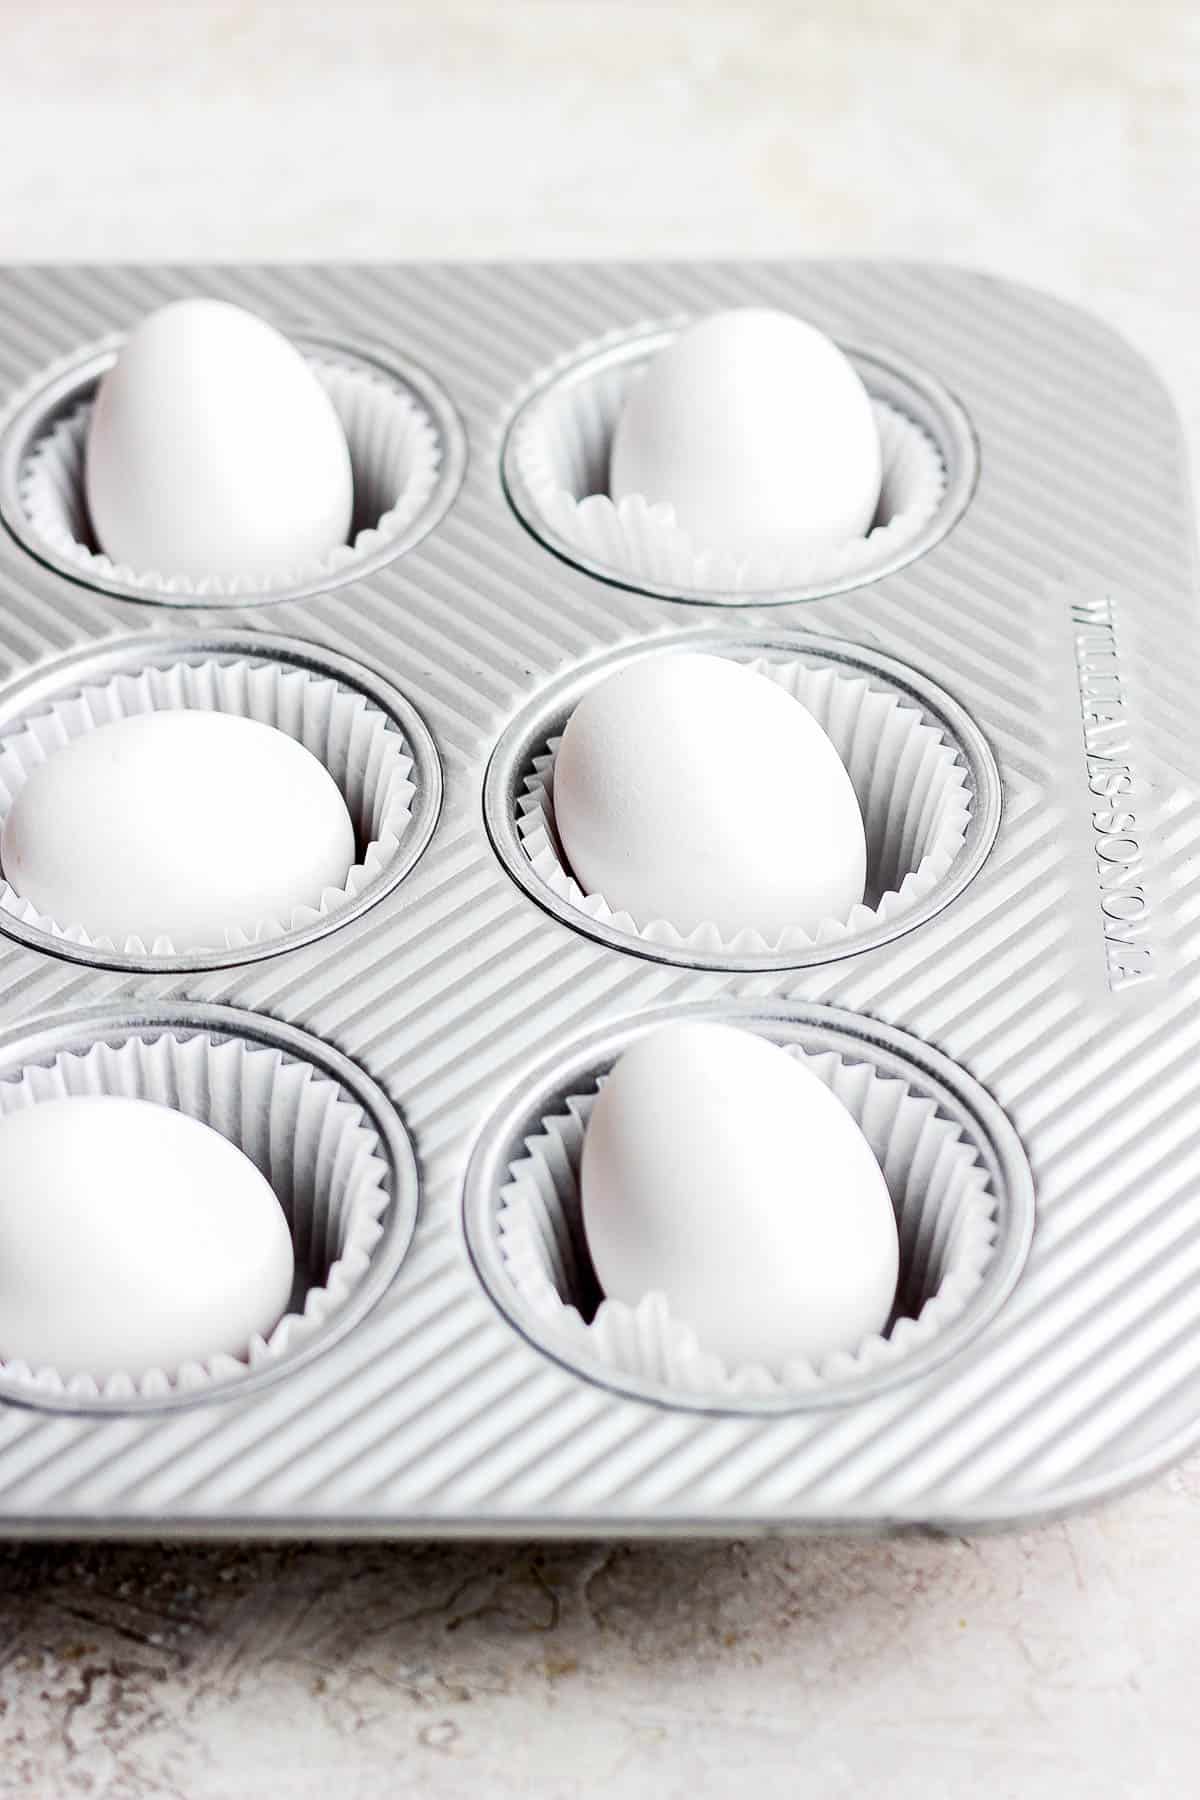 A muffin tin lined with muffin liners with an egg in each liner.